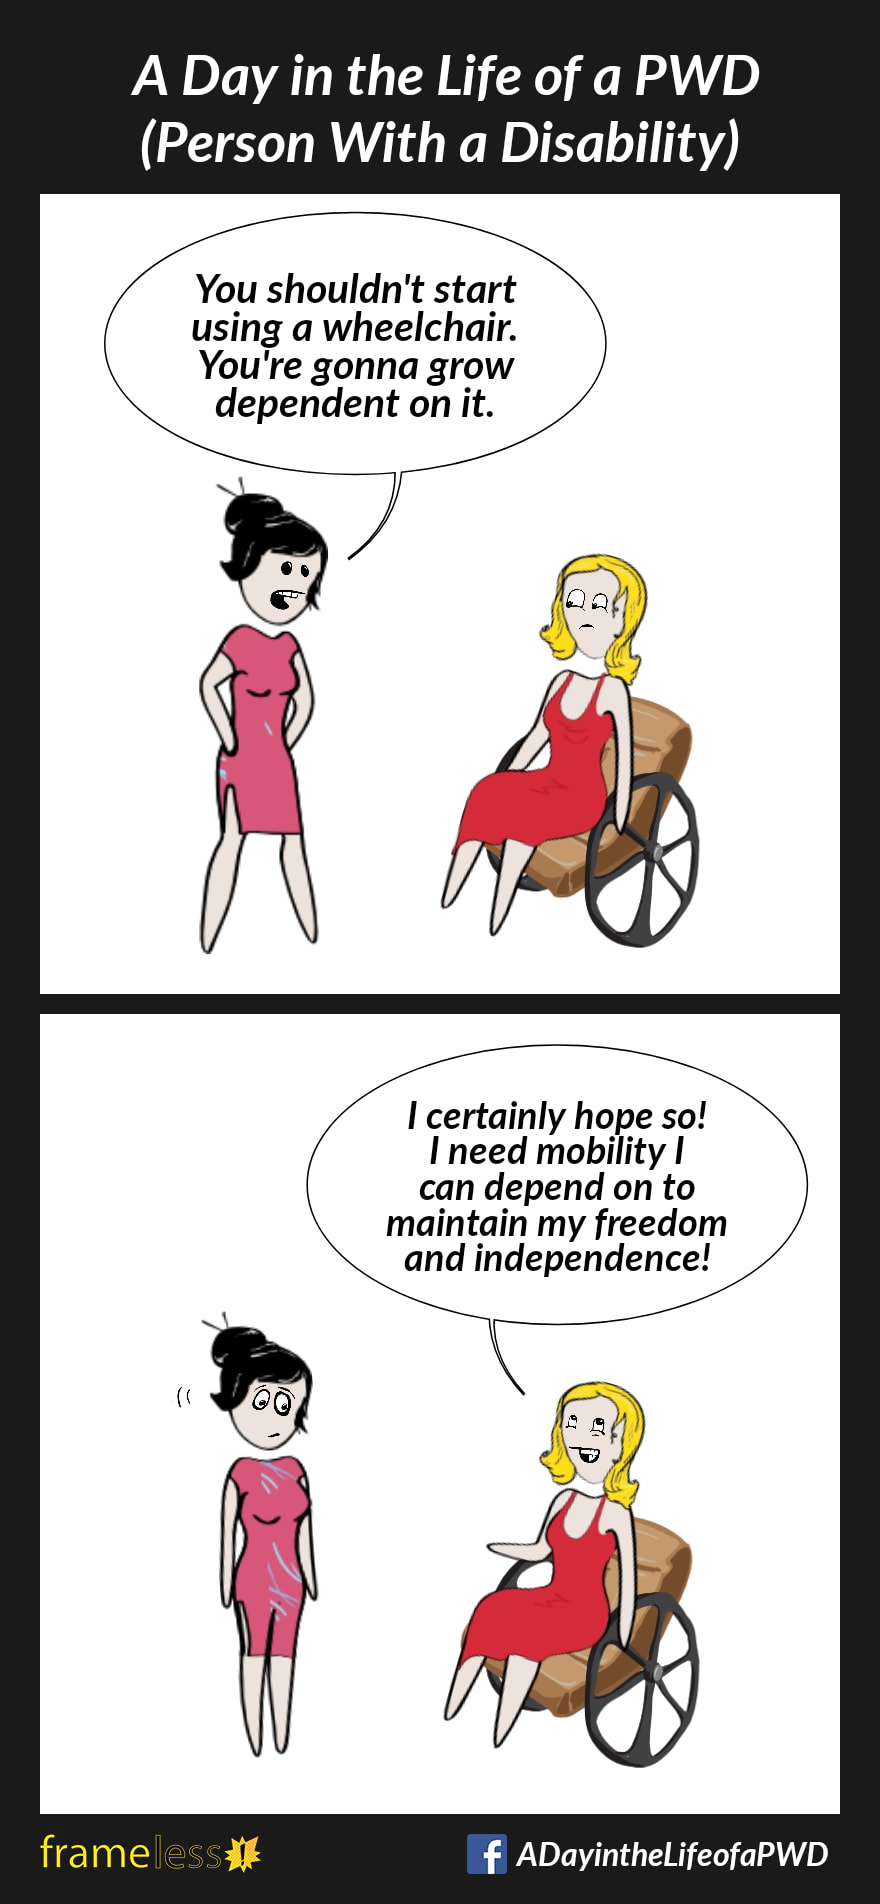 COMIC STRIP 
A Day in the Life of a PWD (Person With a Disability) 

Frame 1:
A woman in a wheelchair is talking to a friend. 
FRIEND: You shouldn't start using a wheelchair. You're gonna grow dependent on it.

Frame 2:
WOMAN: I certainly hope so! I need mobility I can depend on to maintain my freedom and independence!